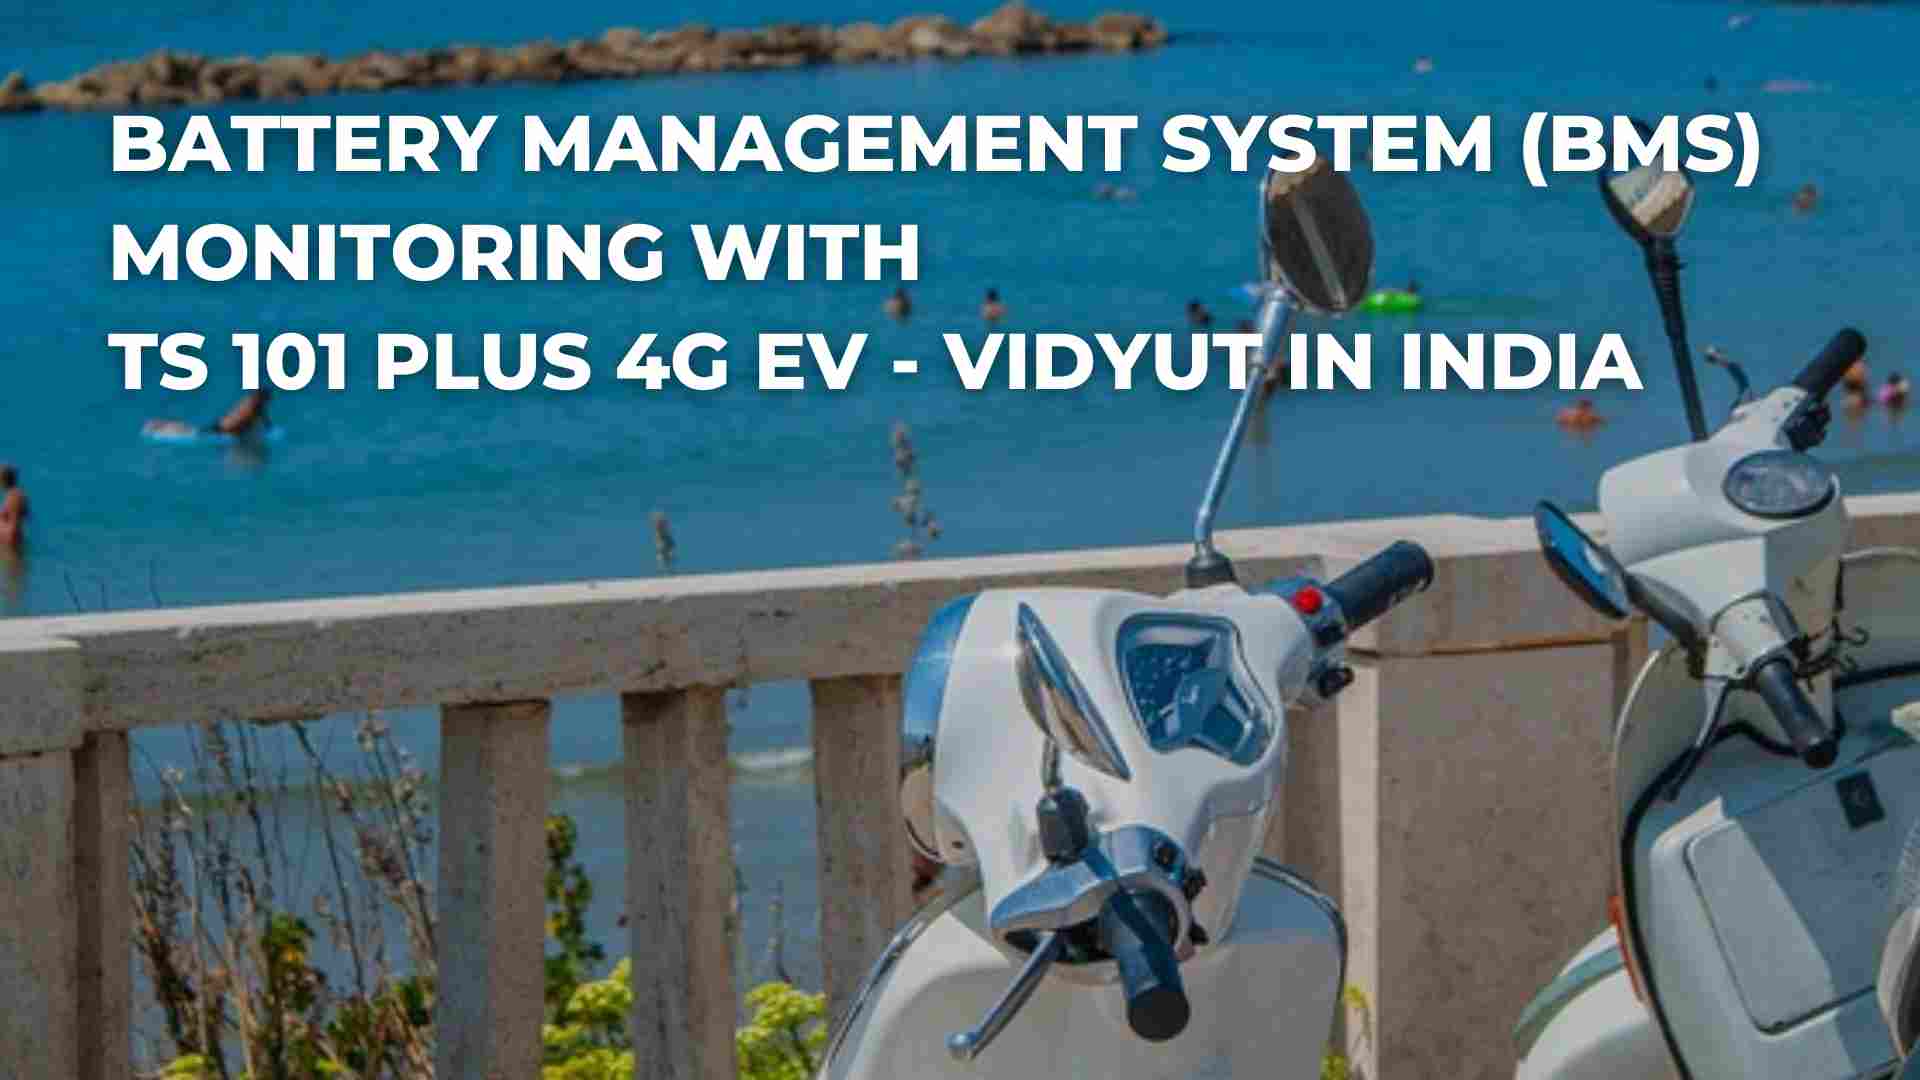 BATTERY MANAGEMENT SYSTEM (BMS) MONITORING WITH TS 101 PLUS 4G EV – VIDYUT IN INDIA